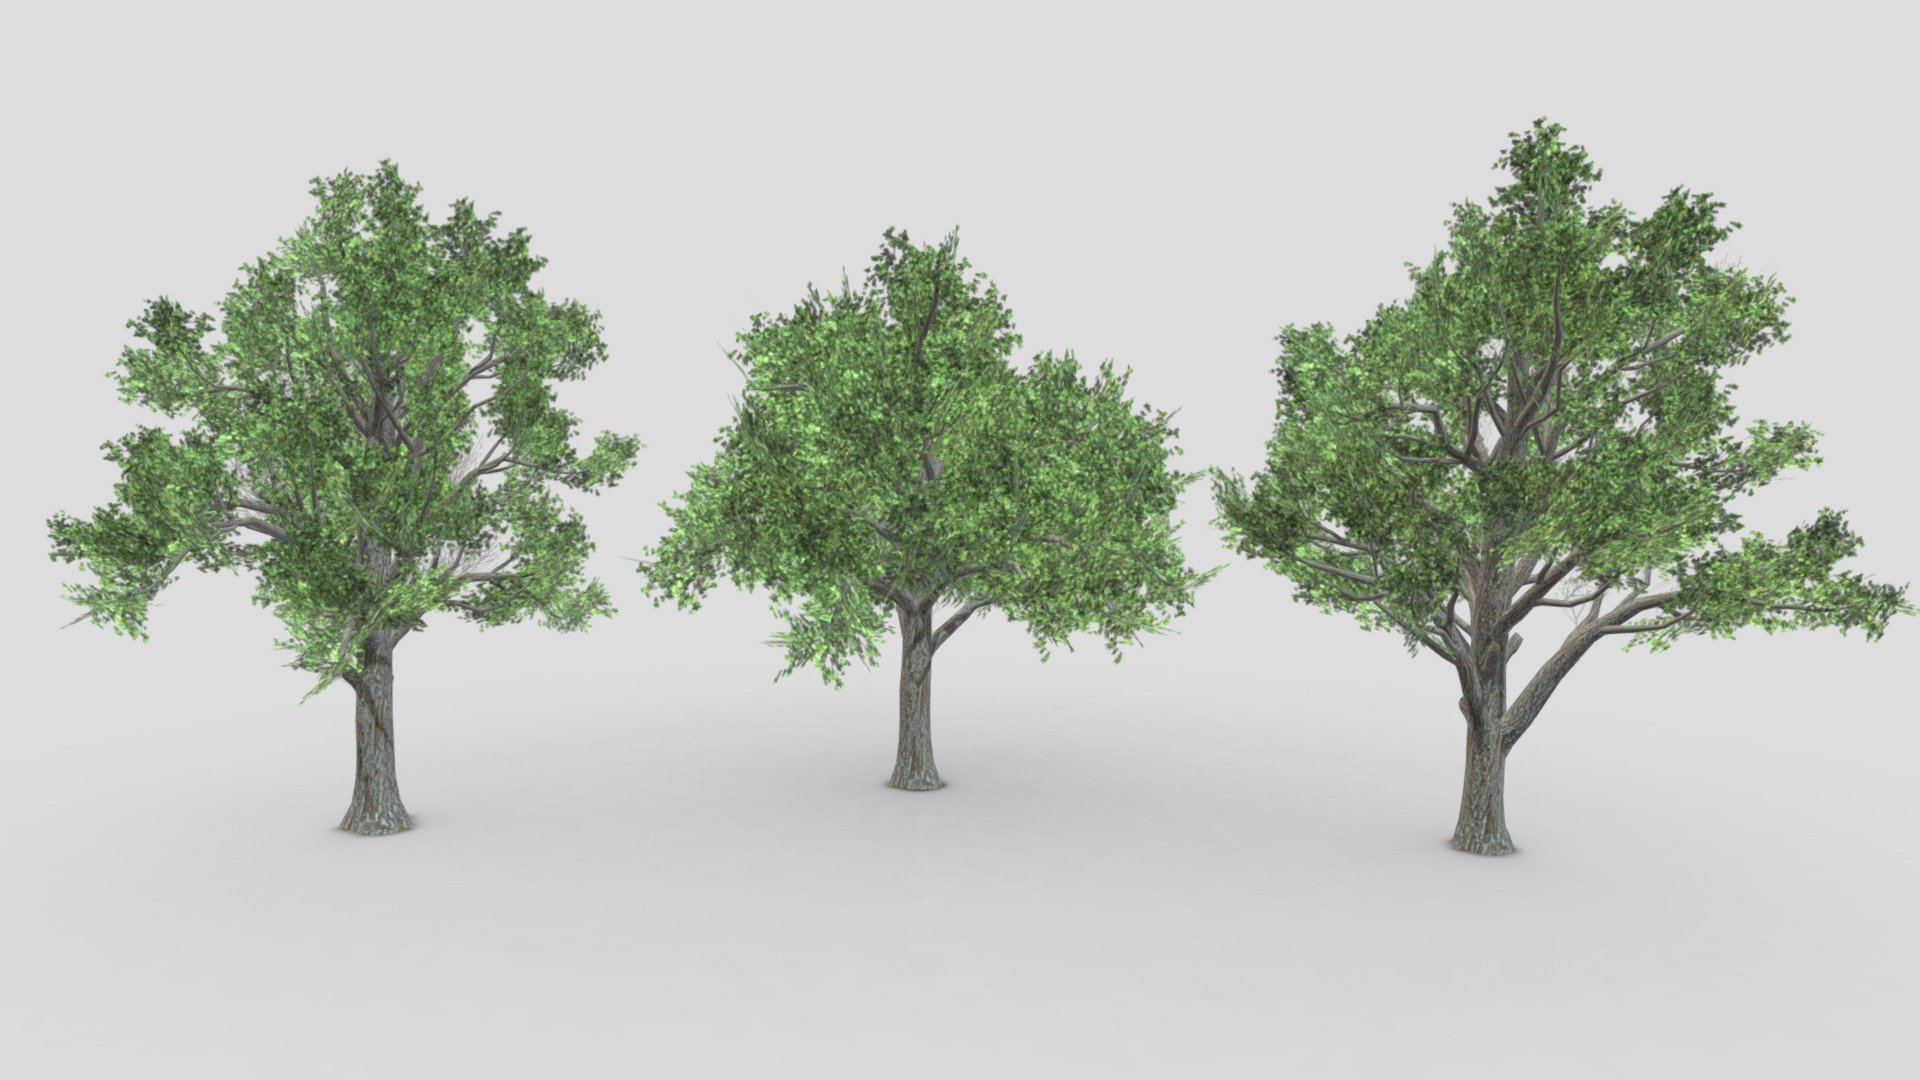 This pack contains three 3D low poly models of the Sugar Maple Tree 3d model